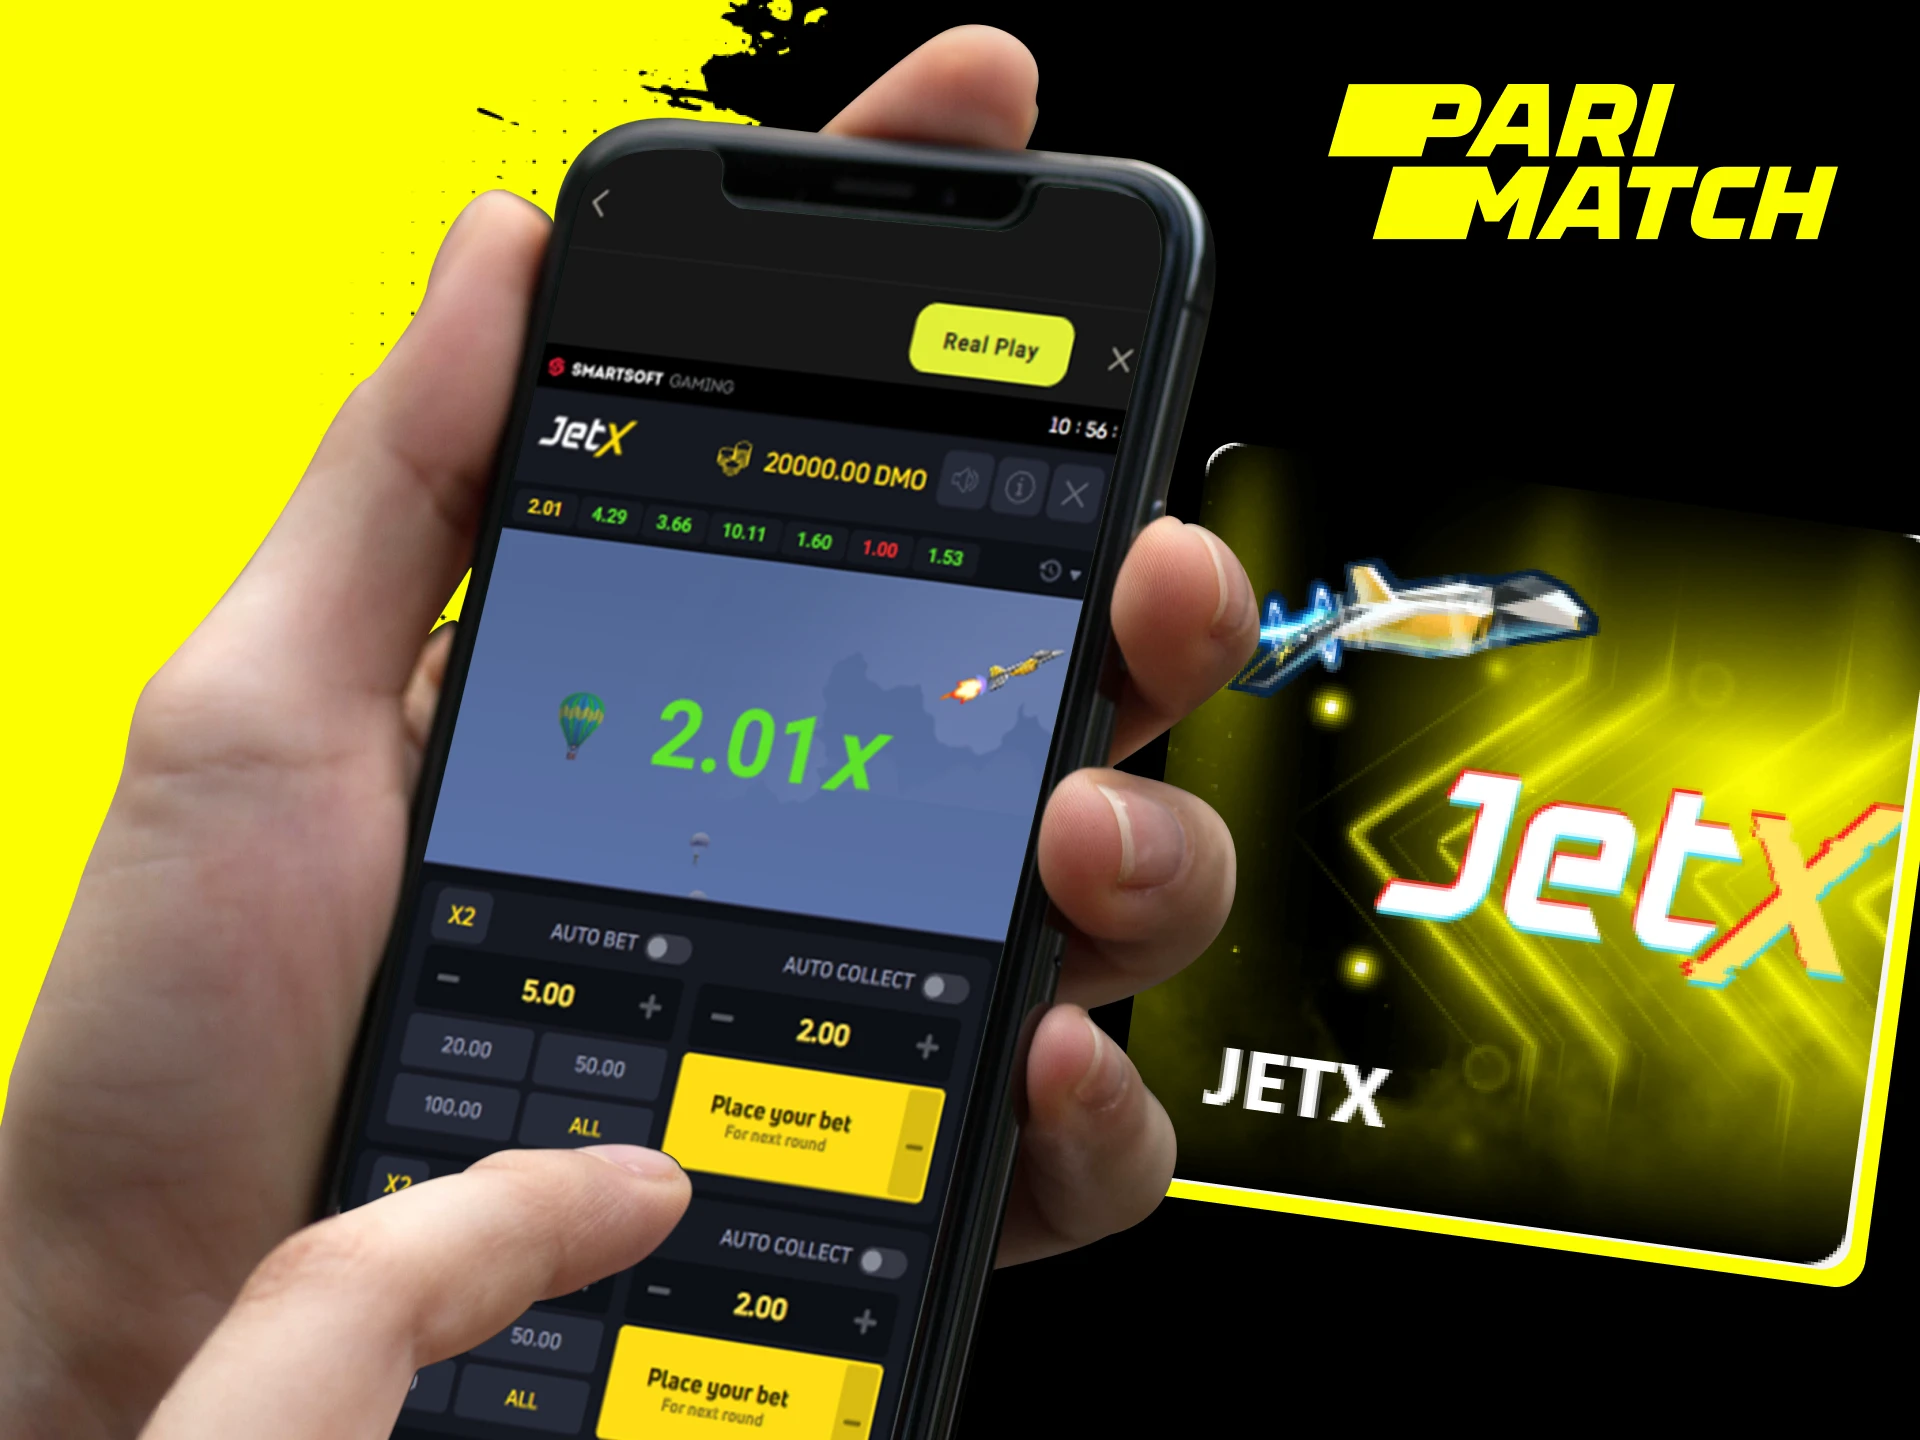 Can I play JetX on the Parimatch online casino website on my phone.